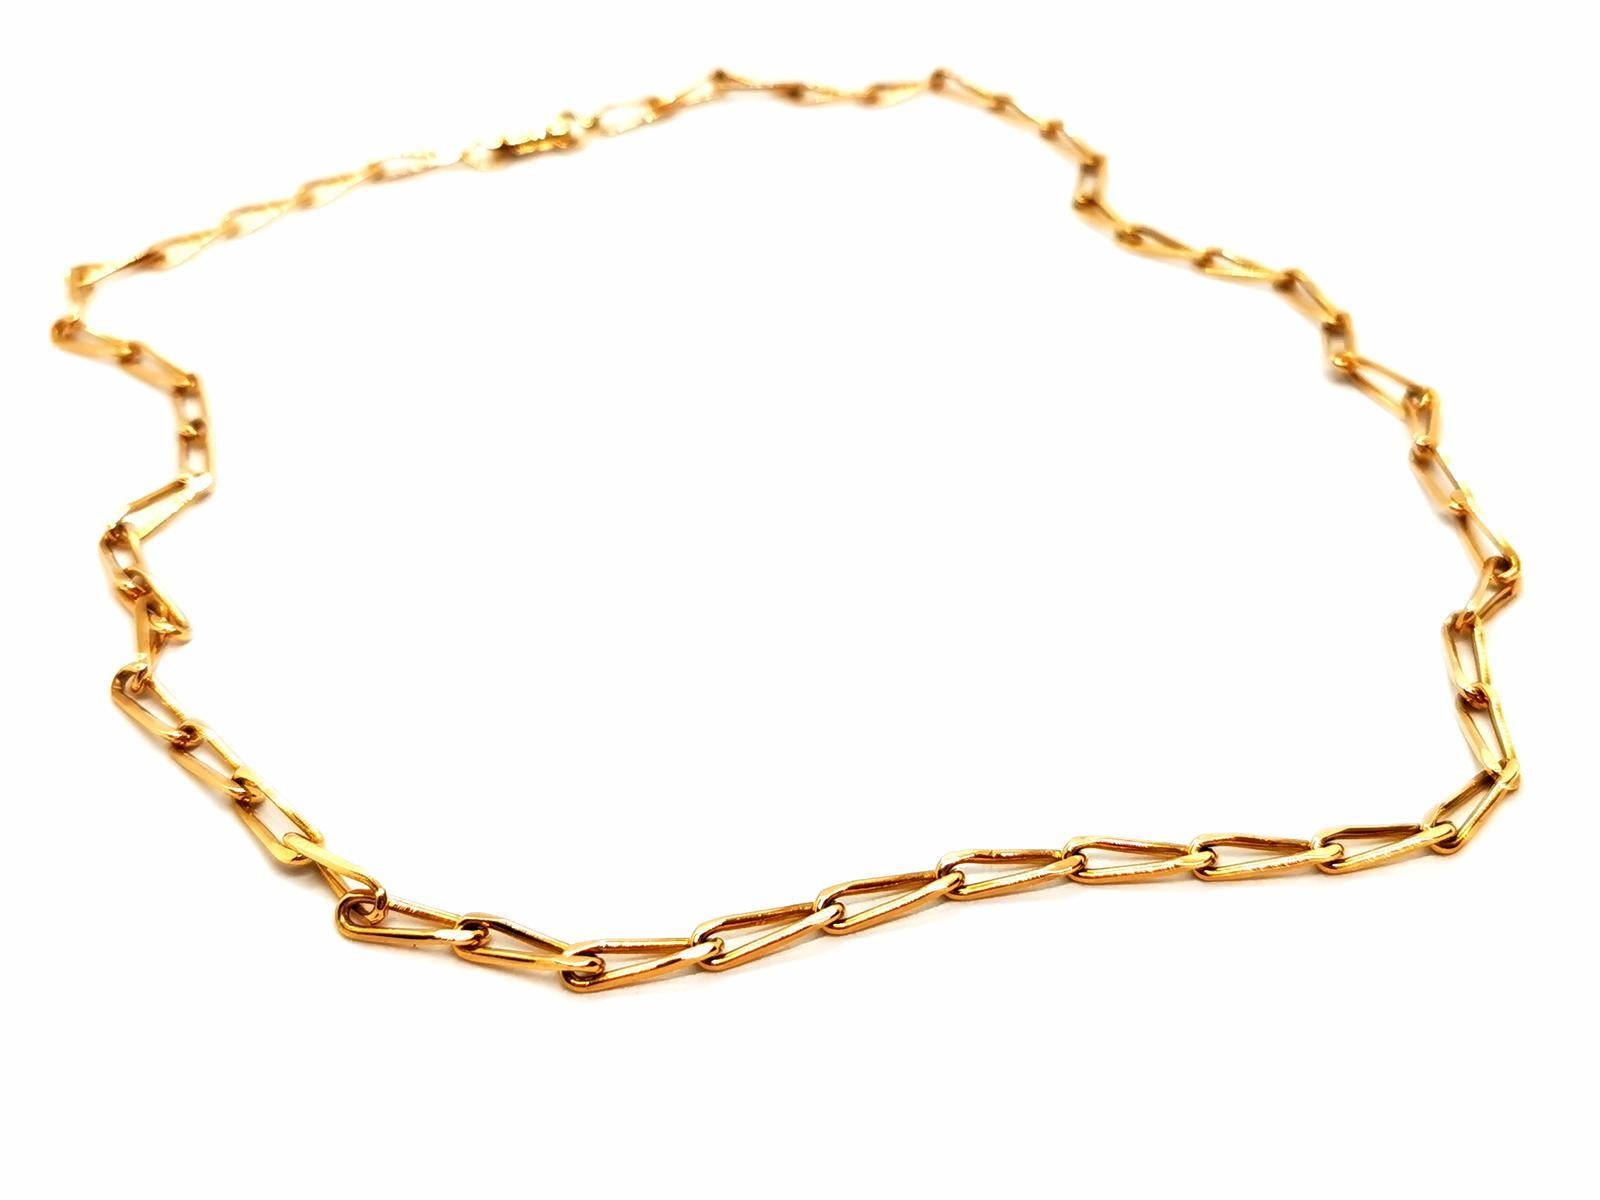 Necklace chain. in yellow gold 750 milliths (18 carats). horse mesh. length: 50 cm. width: 0.35 cm. total weight: 19.81g. Hibou punch. excellent condition.
